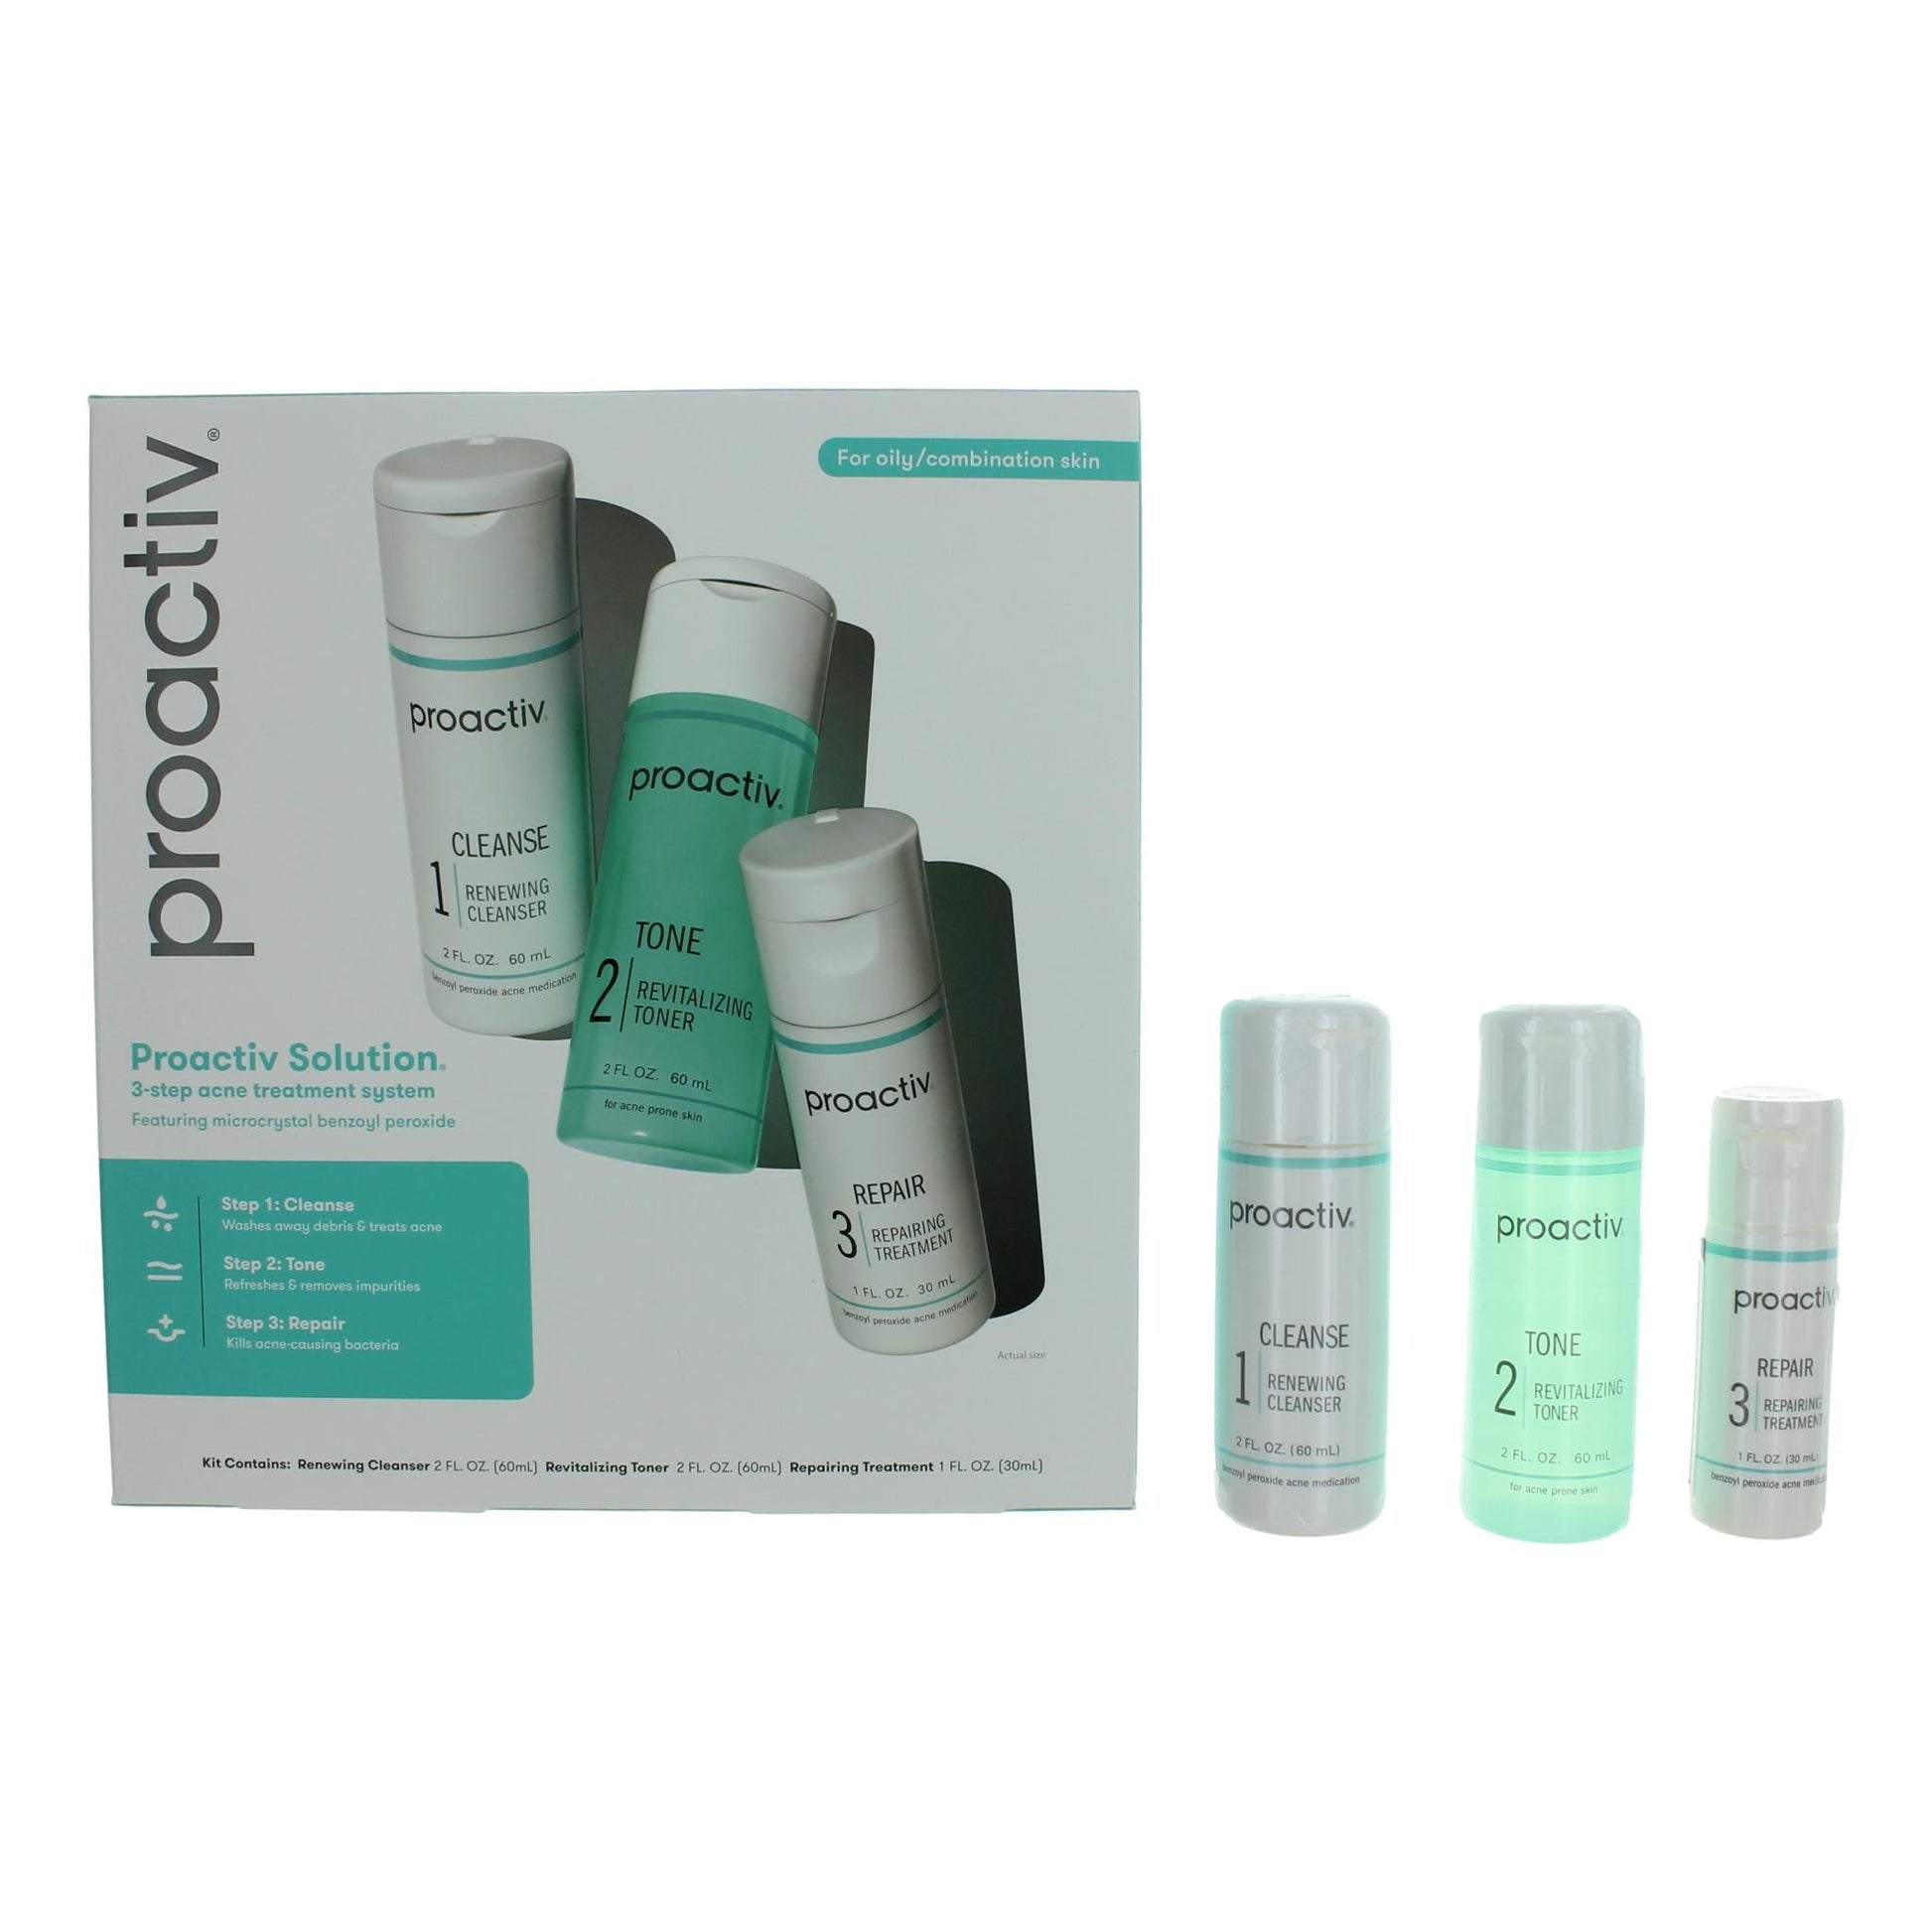 Proactiv Solution by Proactiv, 3 Step Acne Treatment System - Oily/Combo Skin